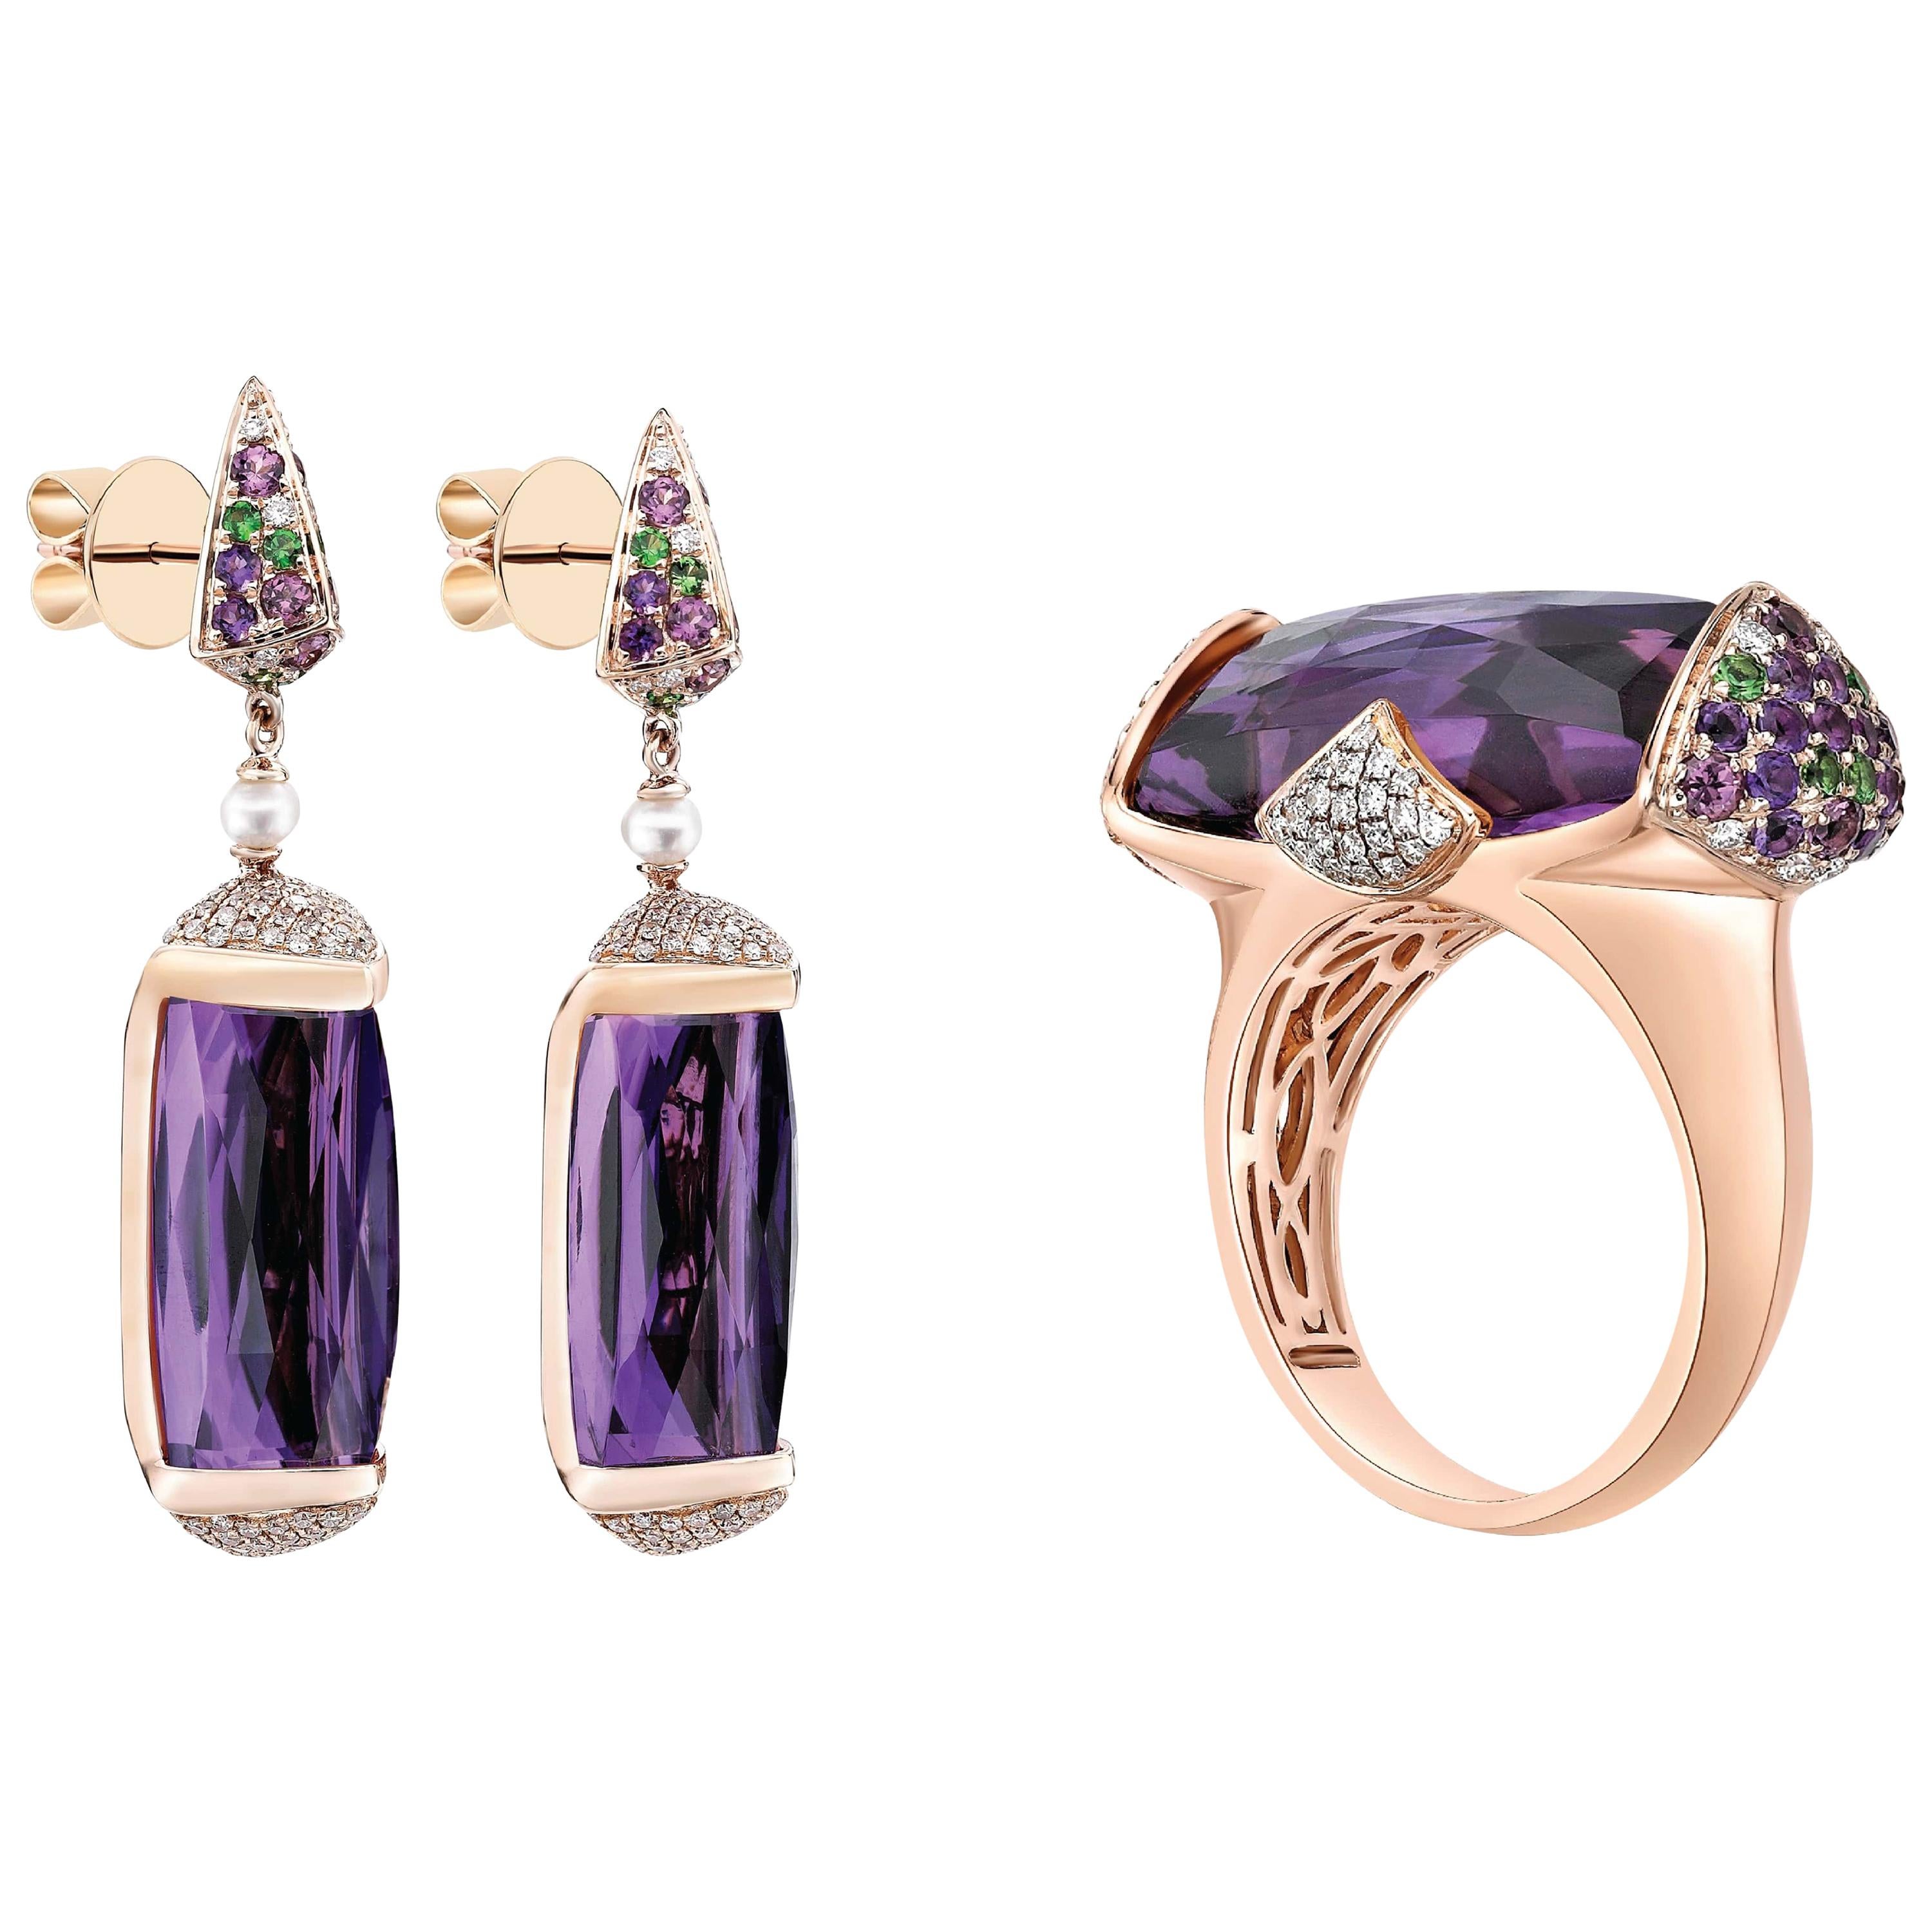 46 Carat Amethyst and Diamond Ring and Earring Set in 18 Karat Rose Gold